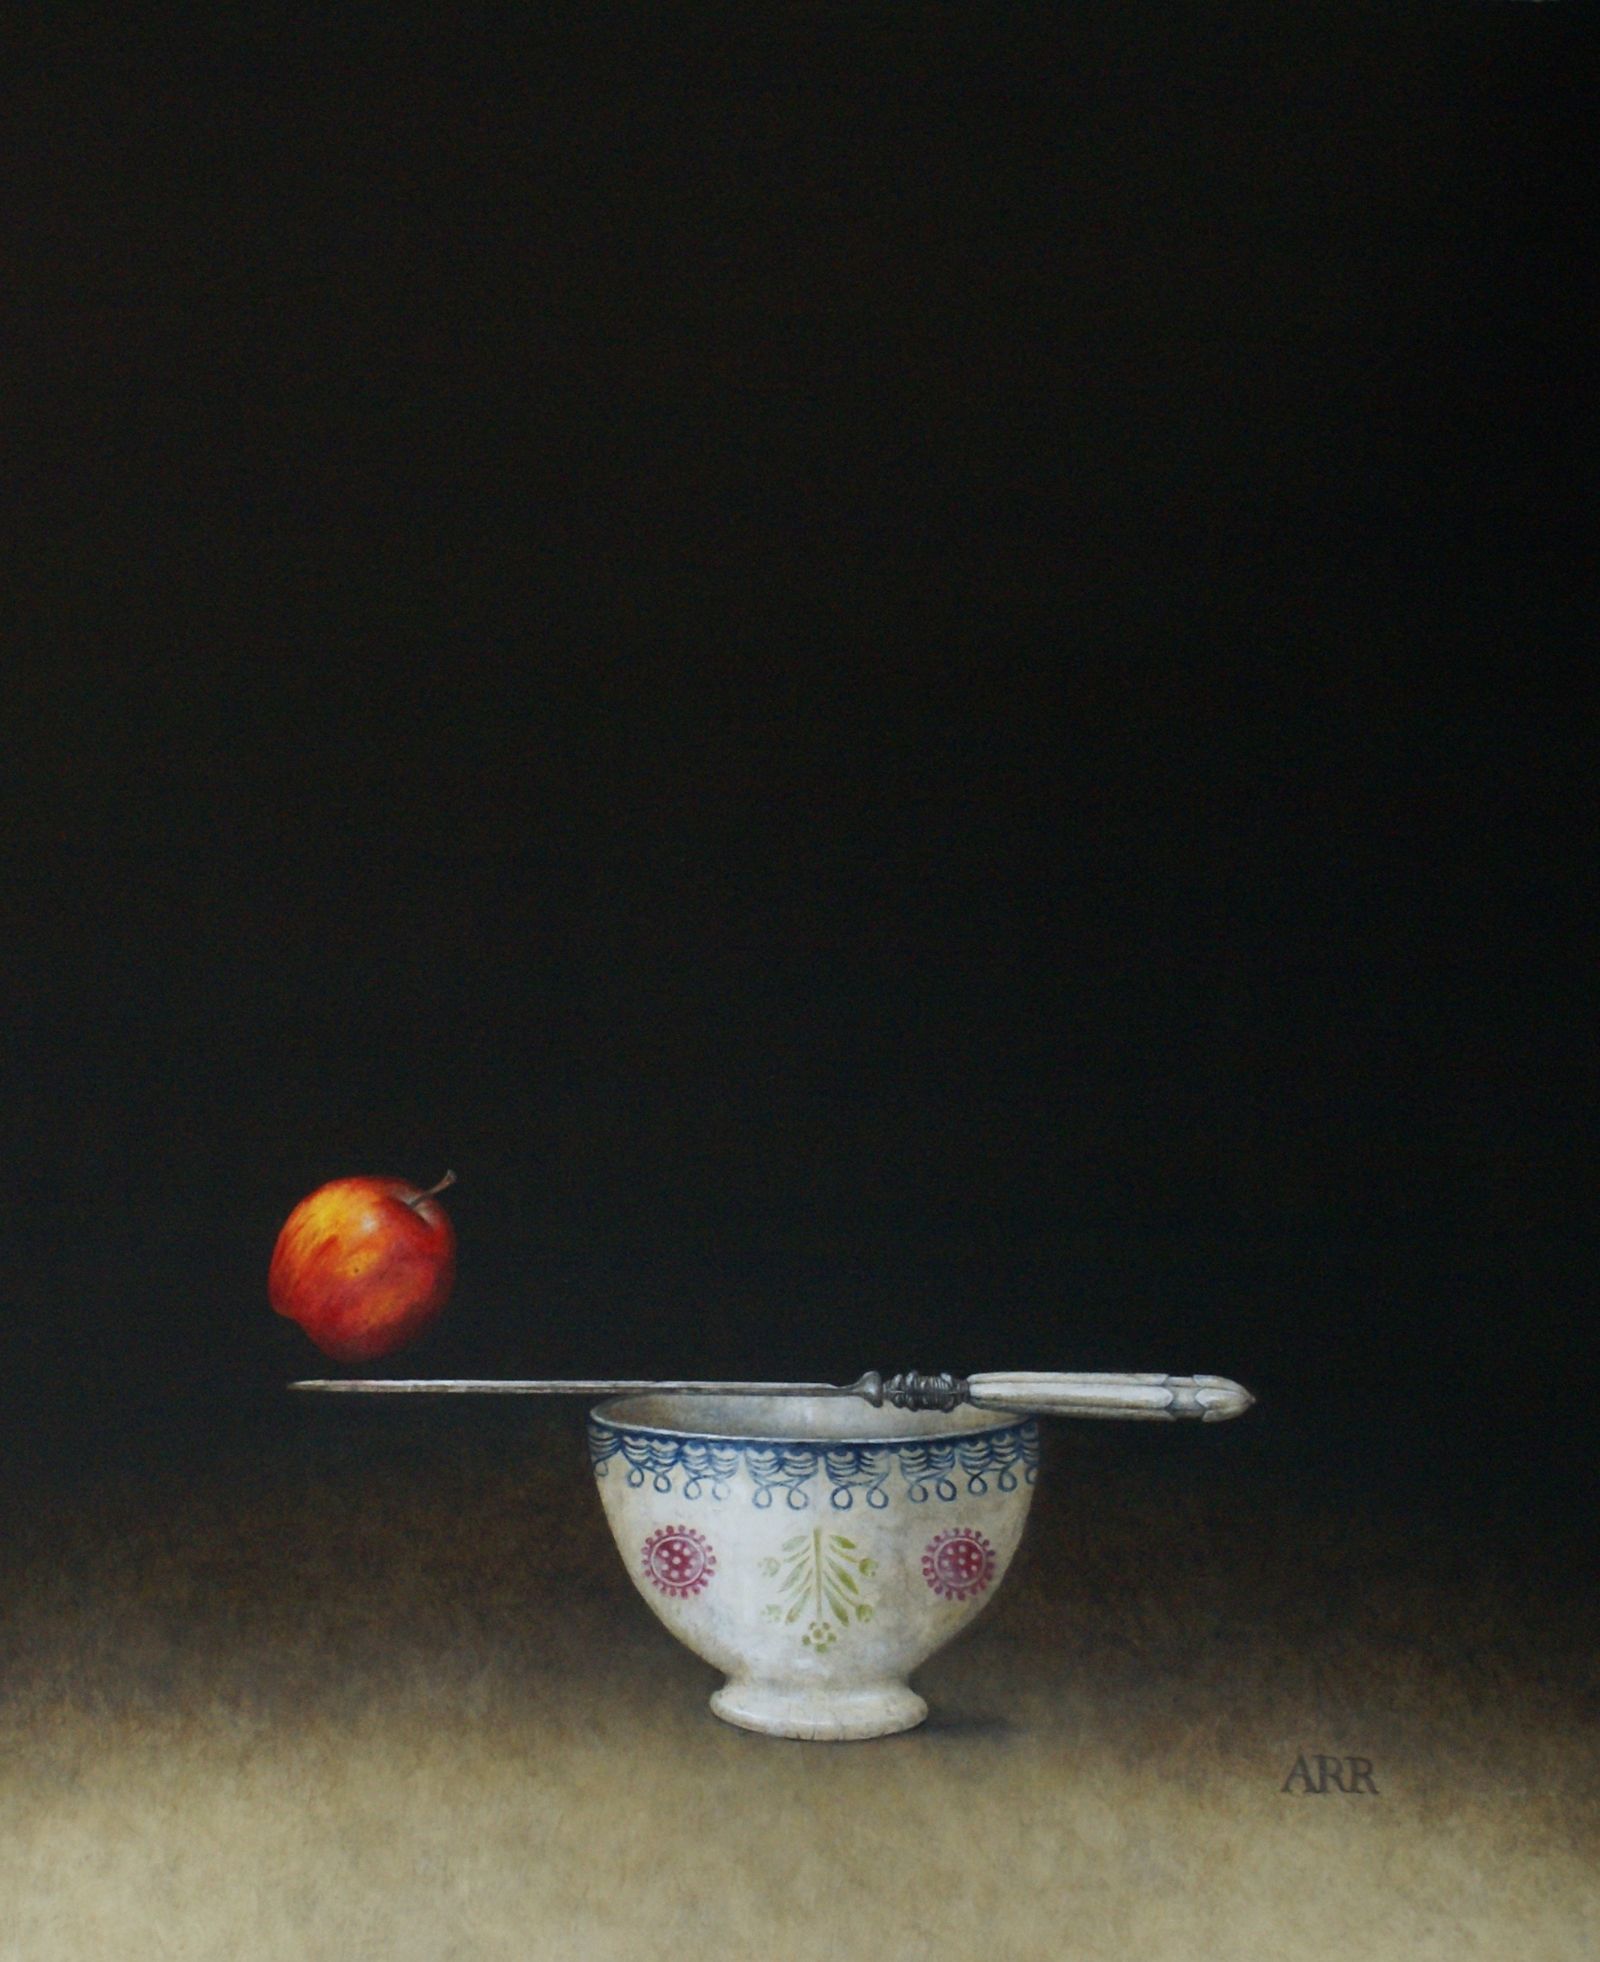 Spongeware Bowl with Knife and Balancing Apple by Alison Rankin